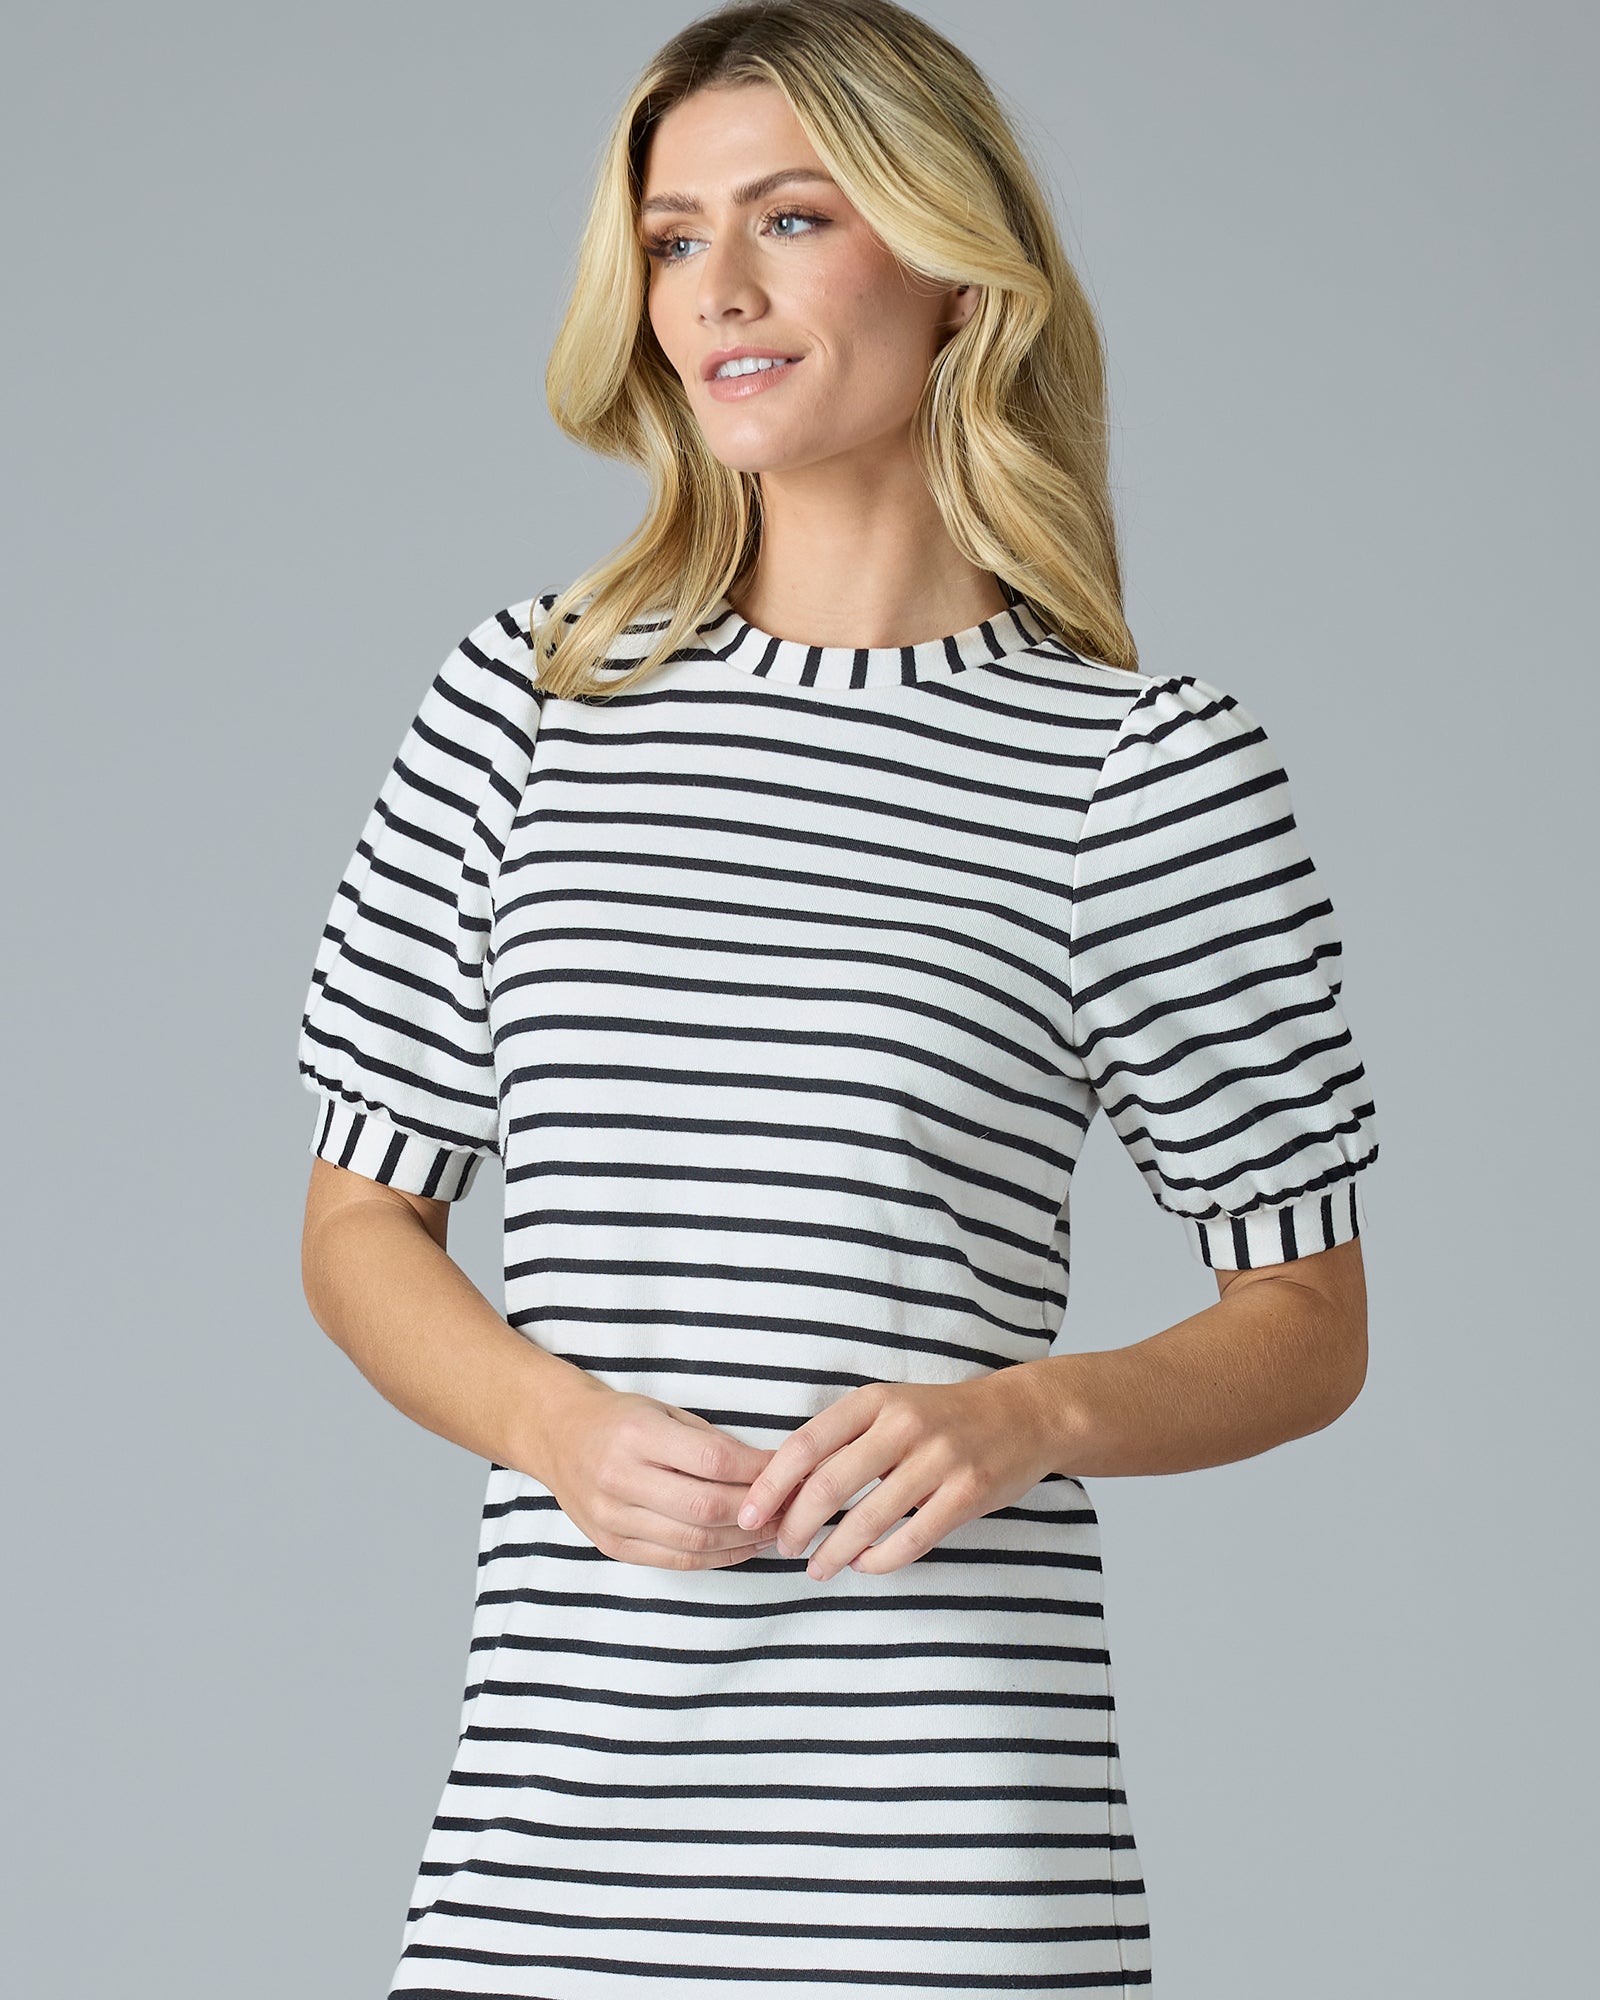 Woman in a short sleeve, navy and cream striped knee-length dress